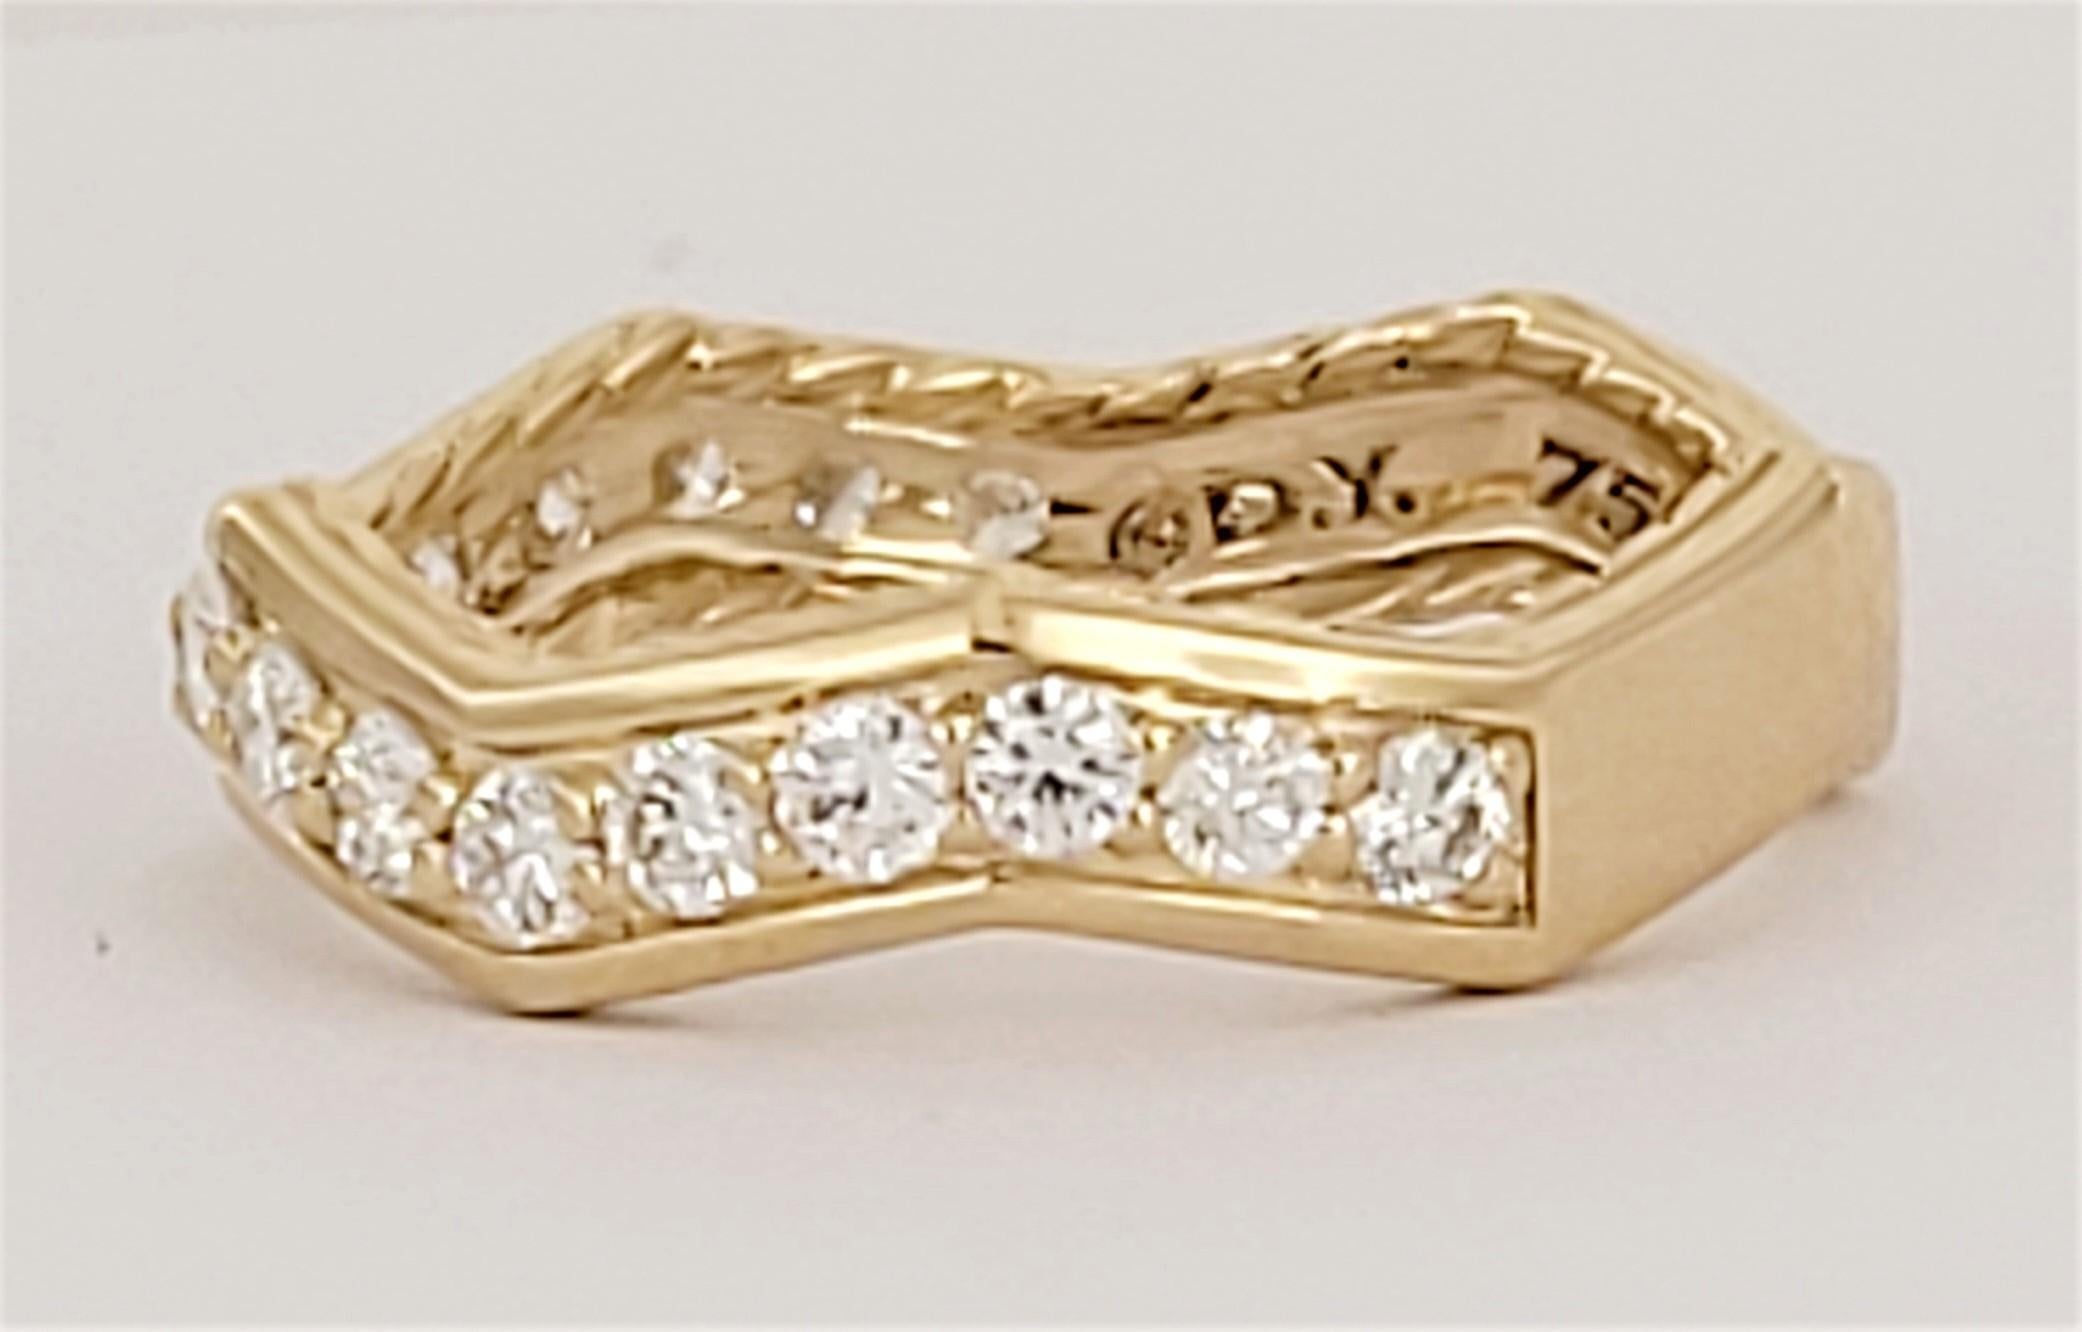 Brand David Yurman 
Stax collection for women
Zig Zag Stax Ring 
Ring Size 7.5
18K Yellow Gold
Pave-set diamonds, 0.68ct total 
Retail Price: $3.200
David Yurman Ring Box is Included